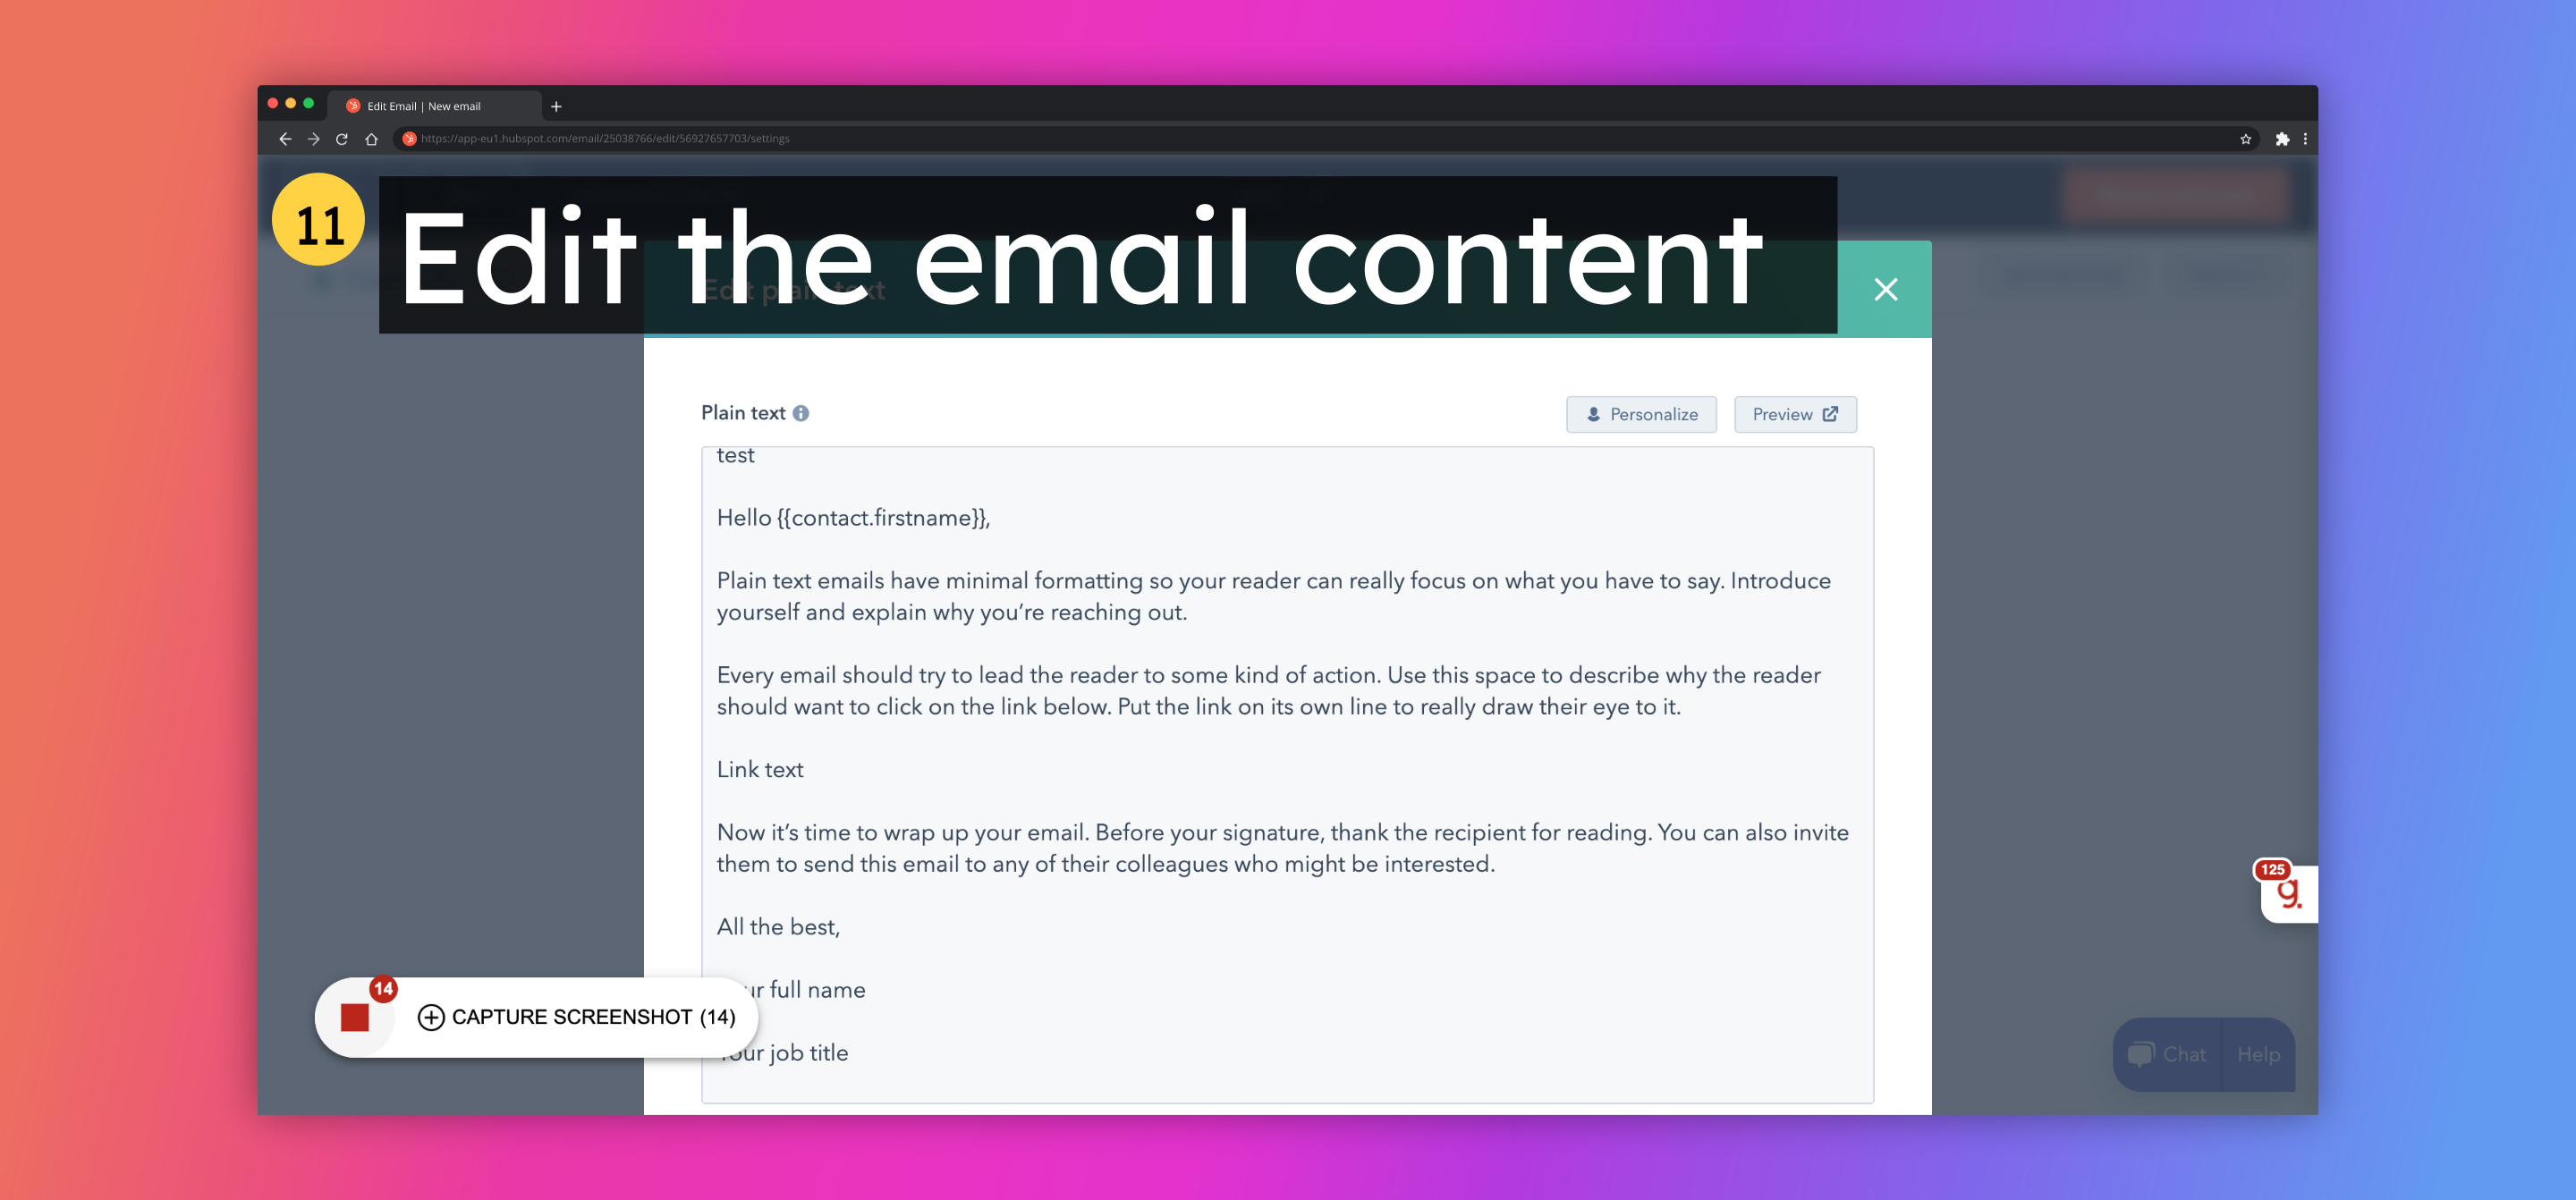 Edit the email content